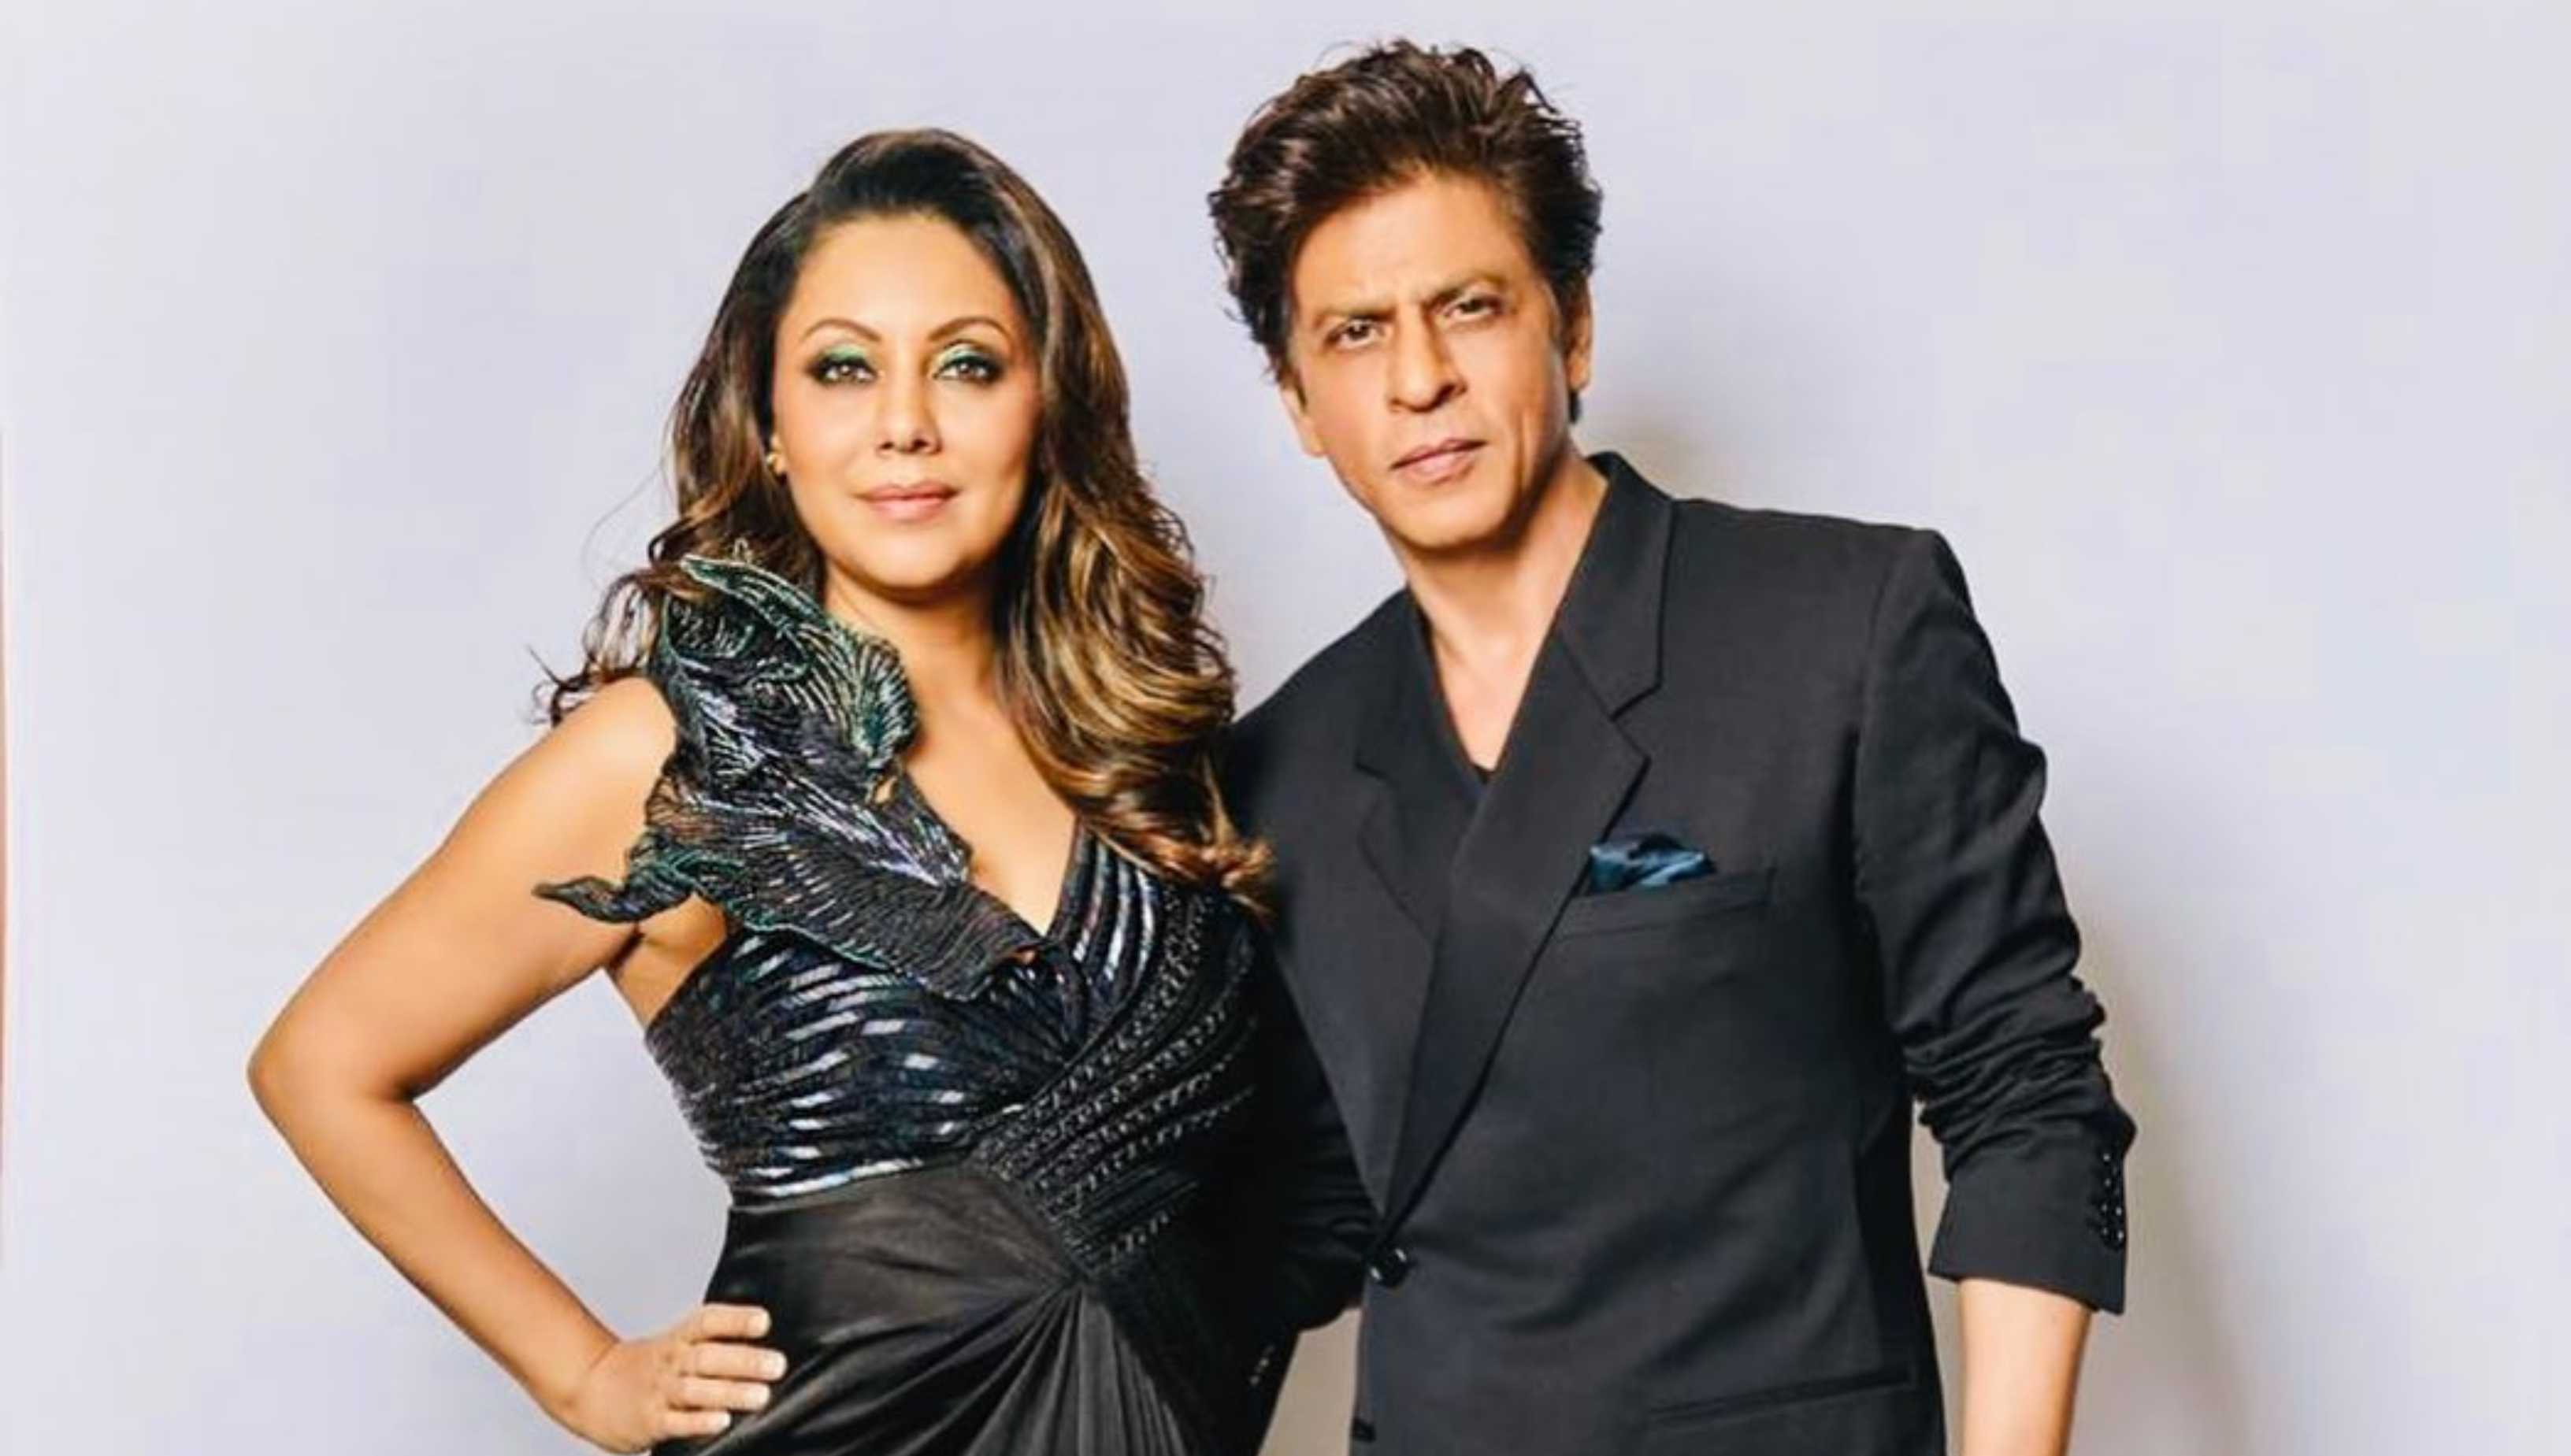 Gauri Khan reveals how the tag of ‘Shah Rukh Khan’s wife’ can be not so fabulous sometimes